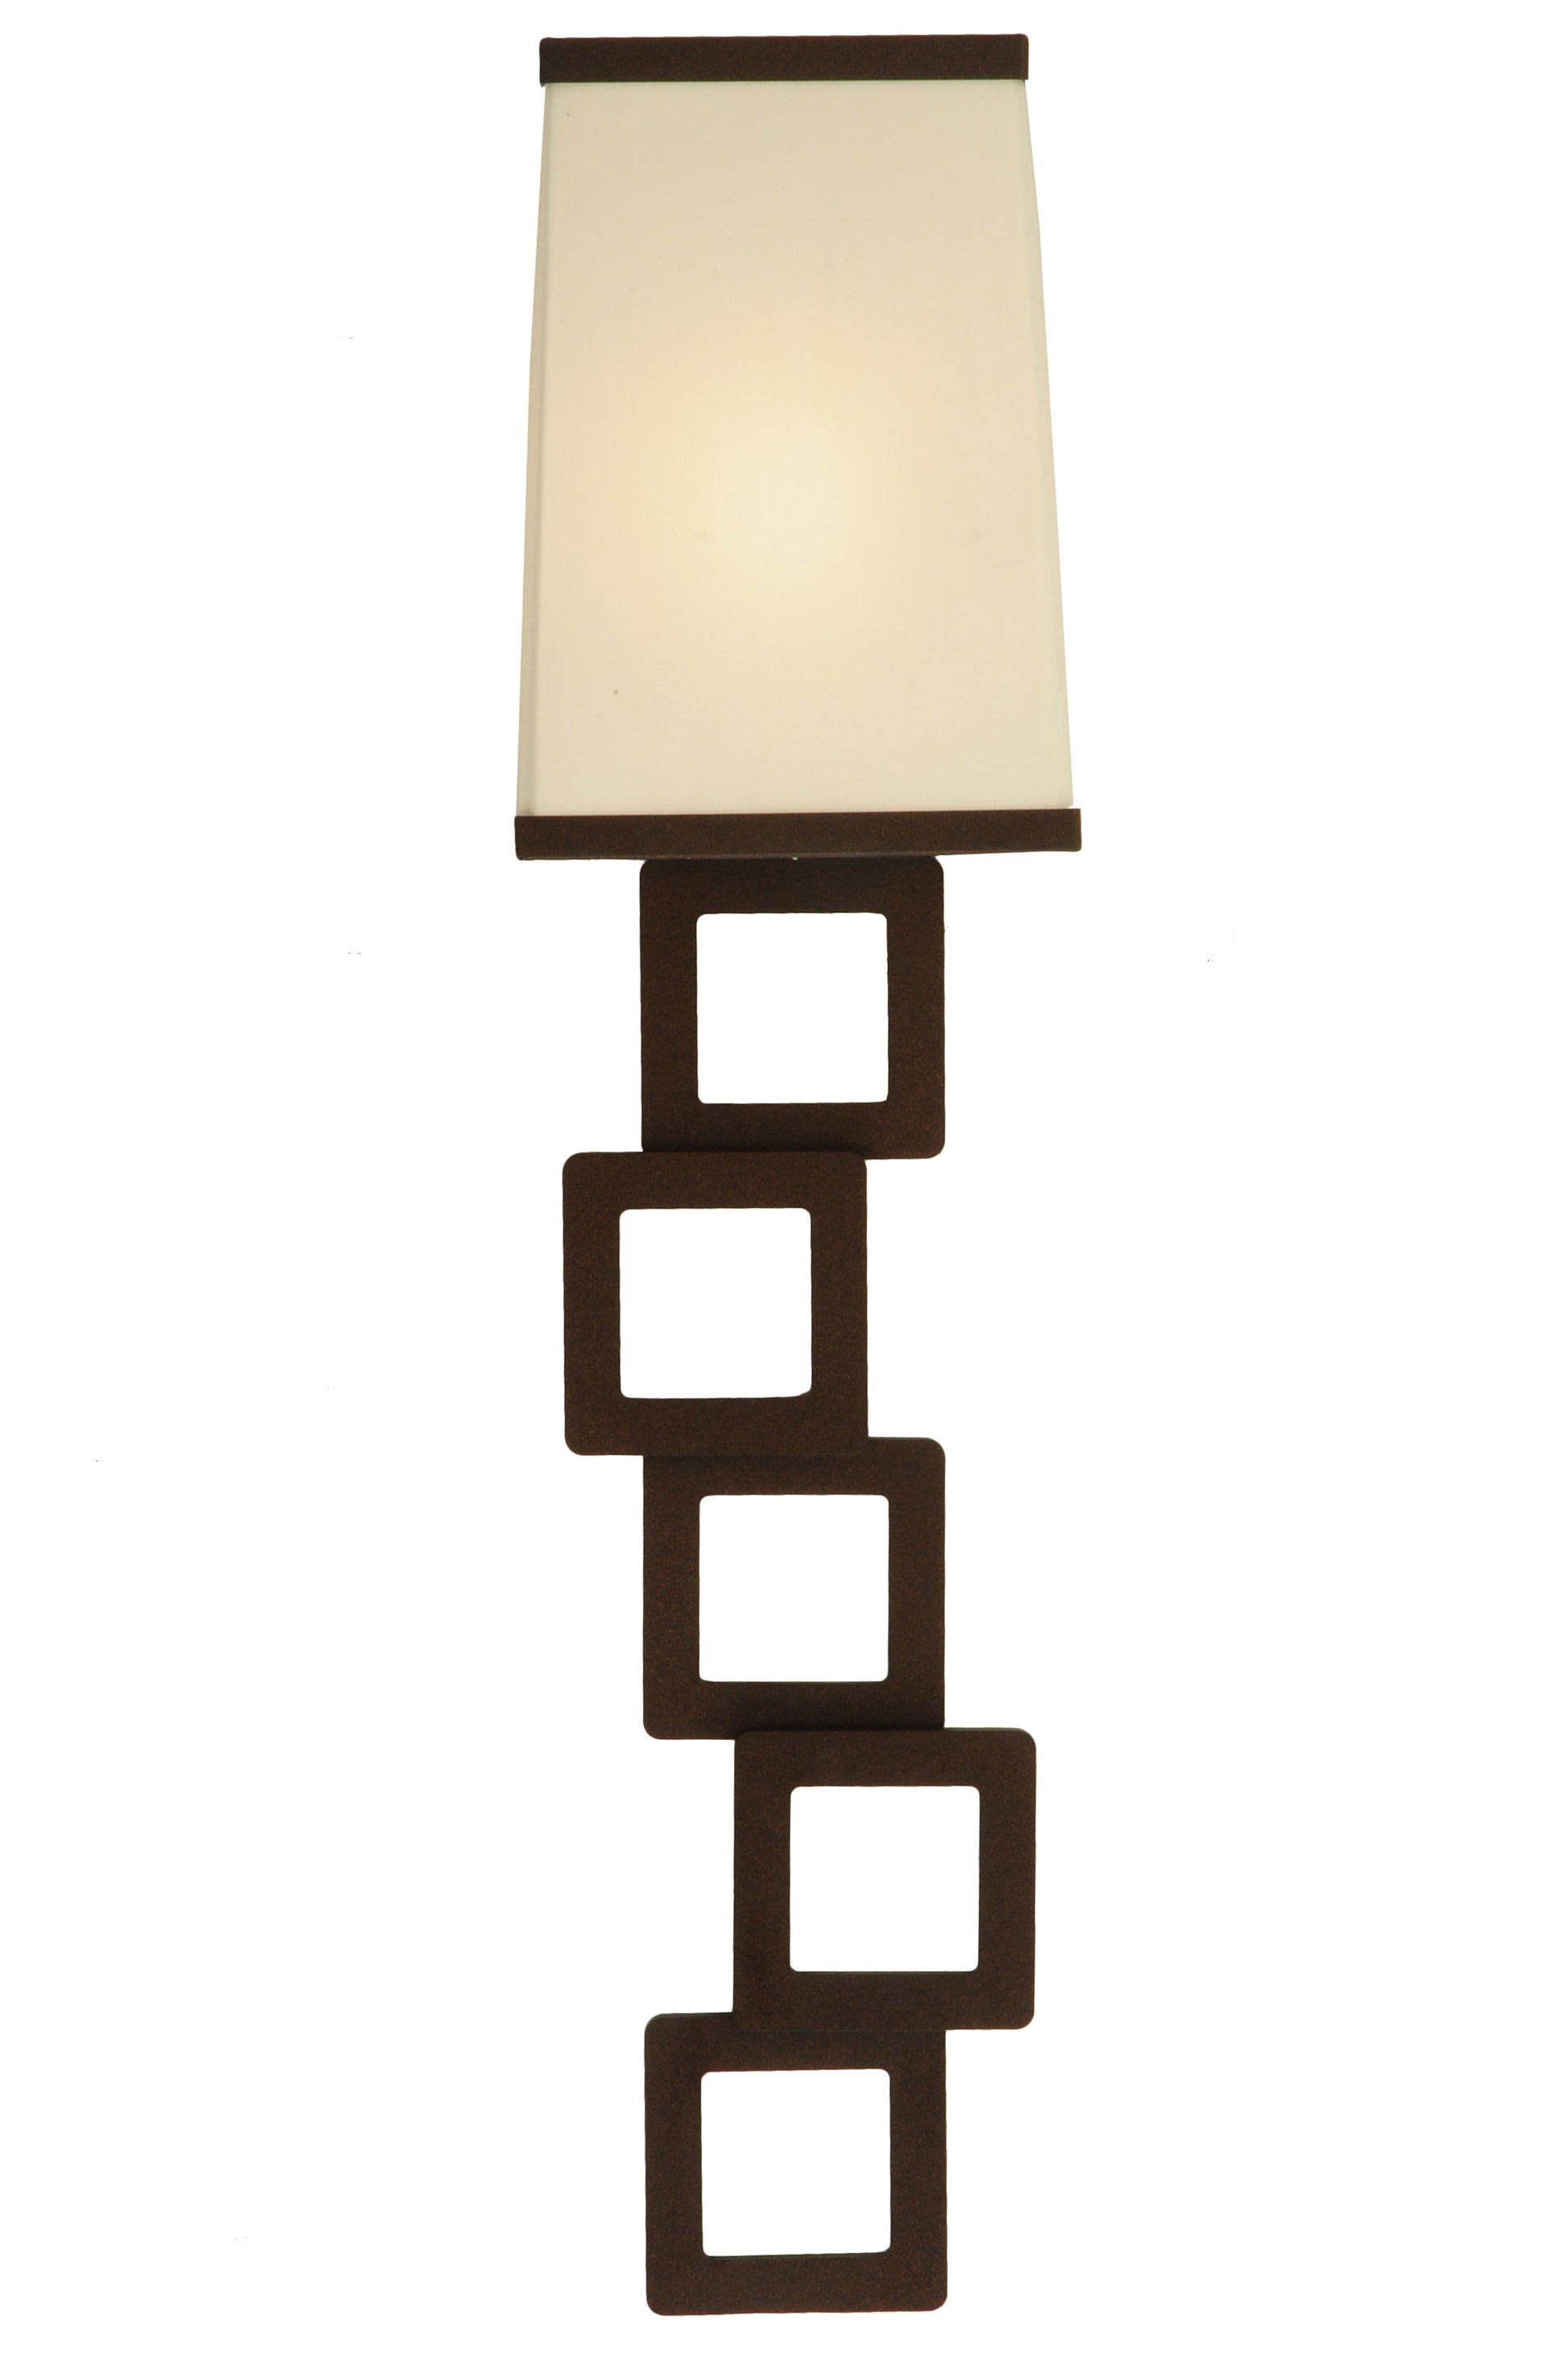 7" Gridluck Wall Sconce by 2nd Ave Lighting